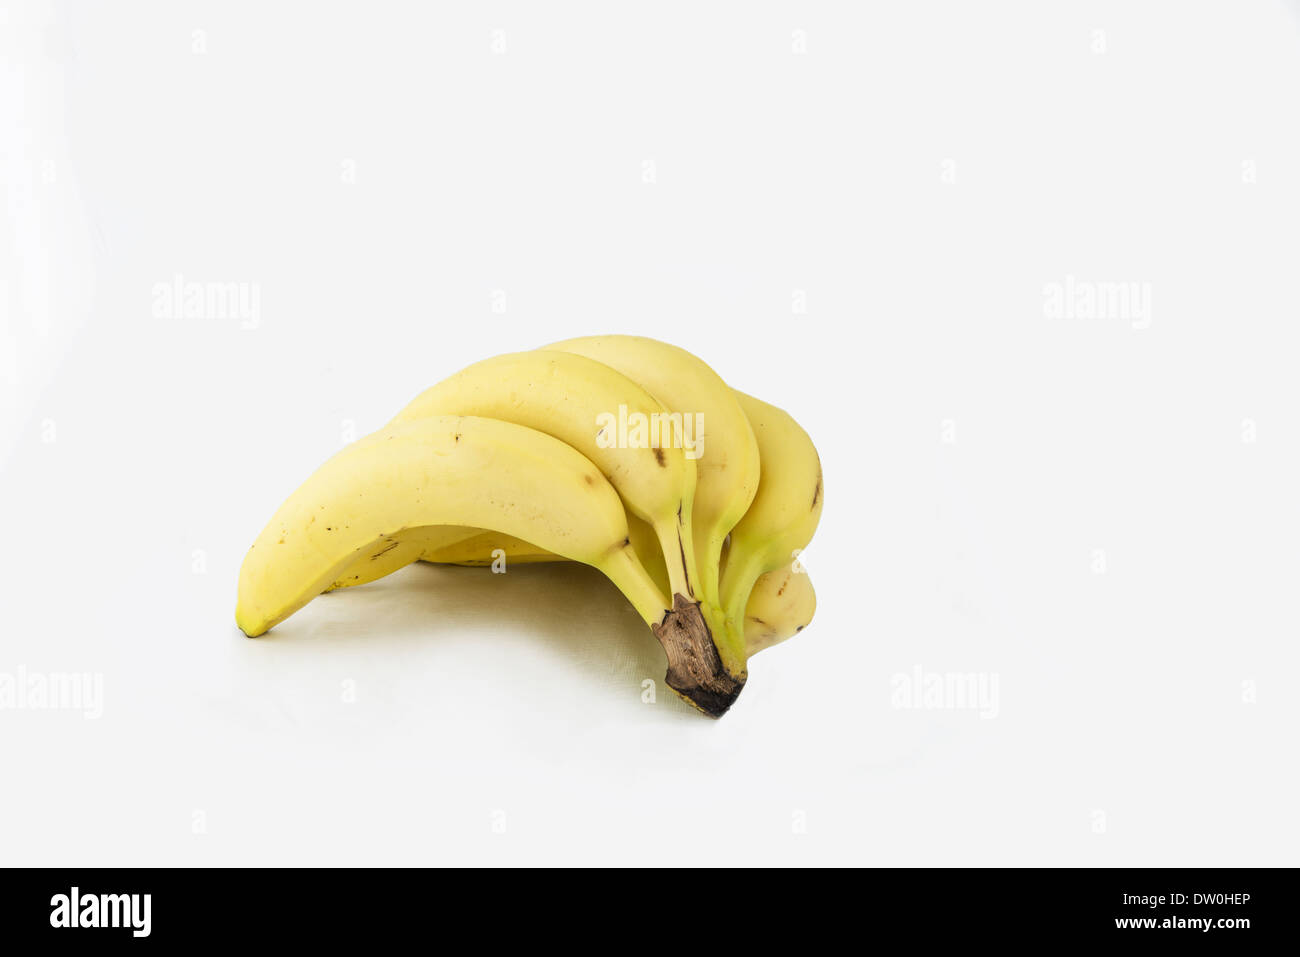 https://c8.alamy.com/comp/DW0HEP/a-bunch-of-ripe-whole-bananas-isolated-on-a-white-background-cutout-DW0HEP.jpg